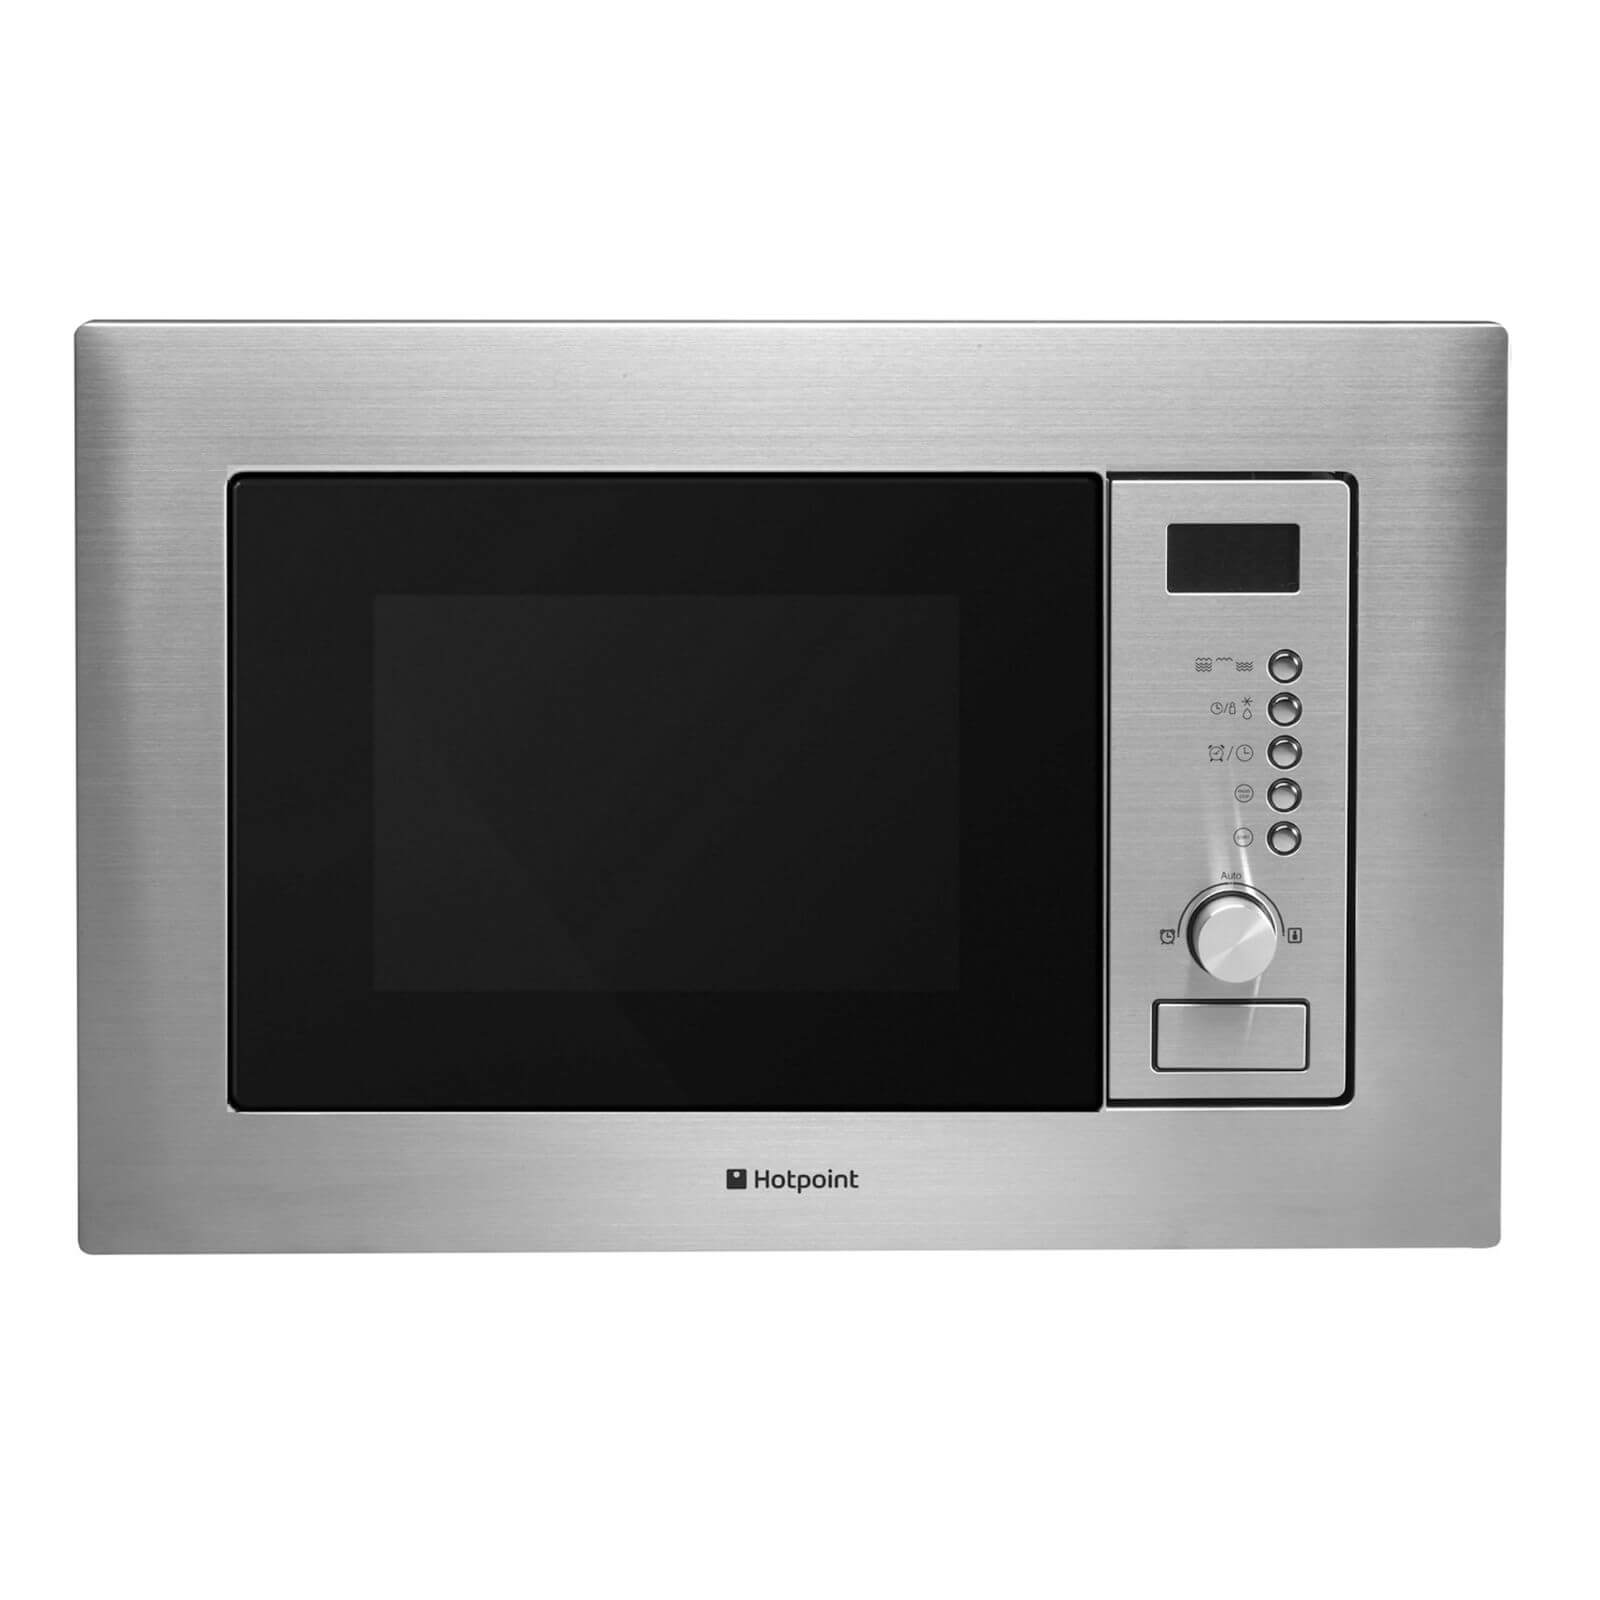 Hotpoint Newstyle MWH122.1 X Built-in Microwave Grill - Stainless Steel